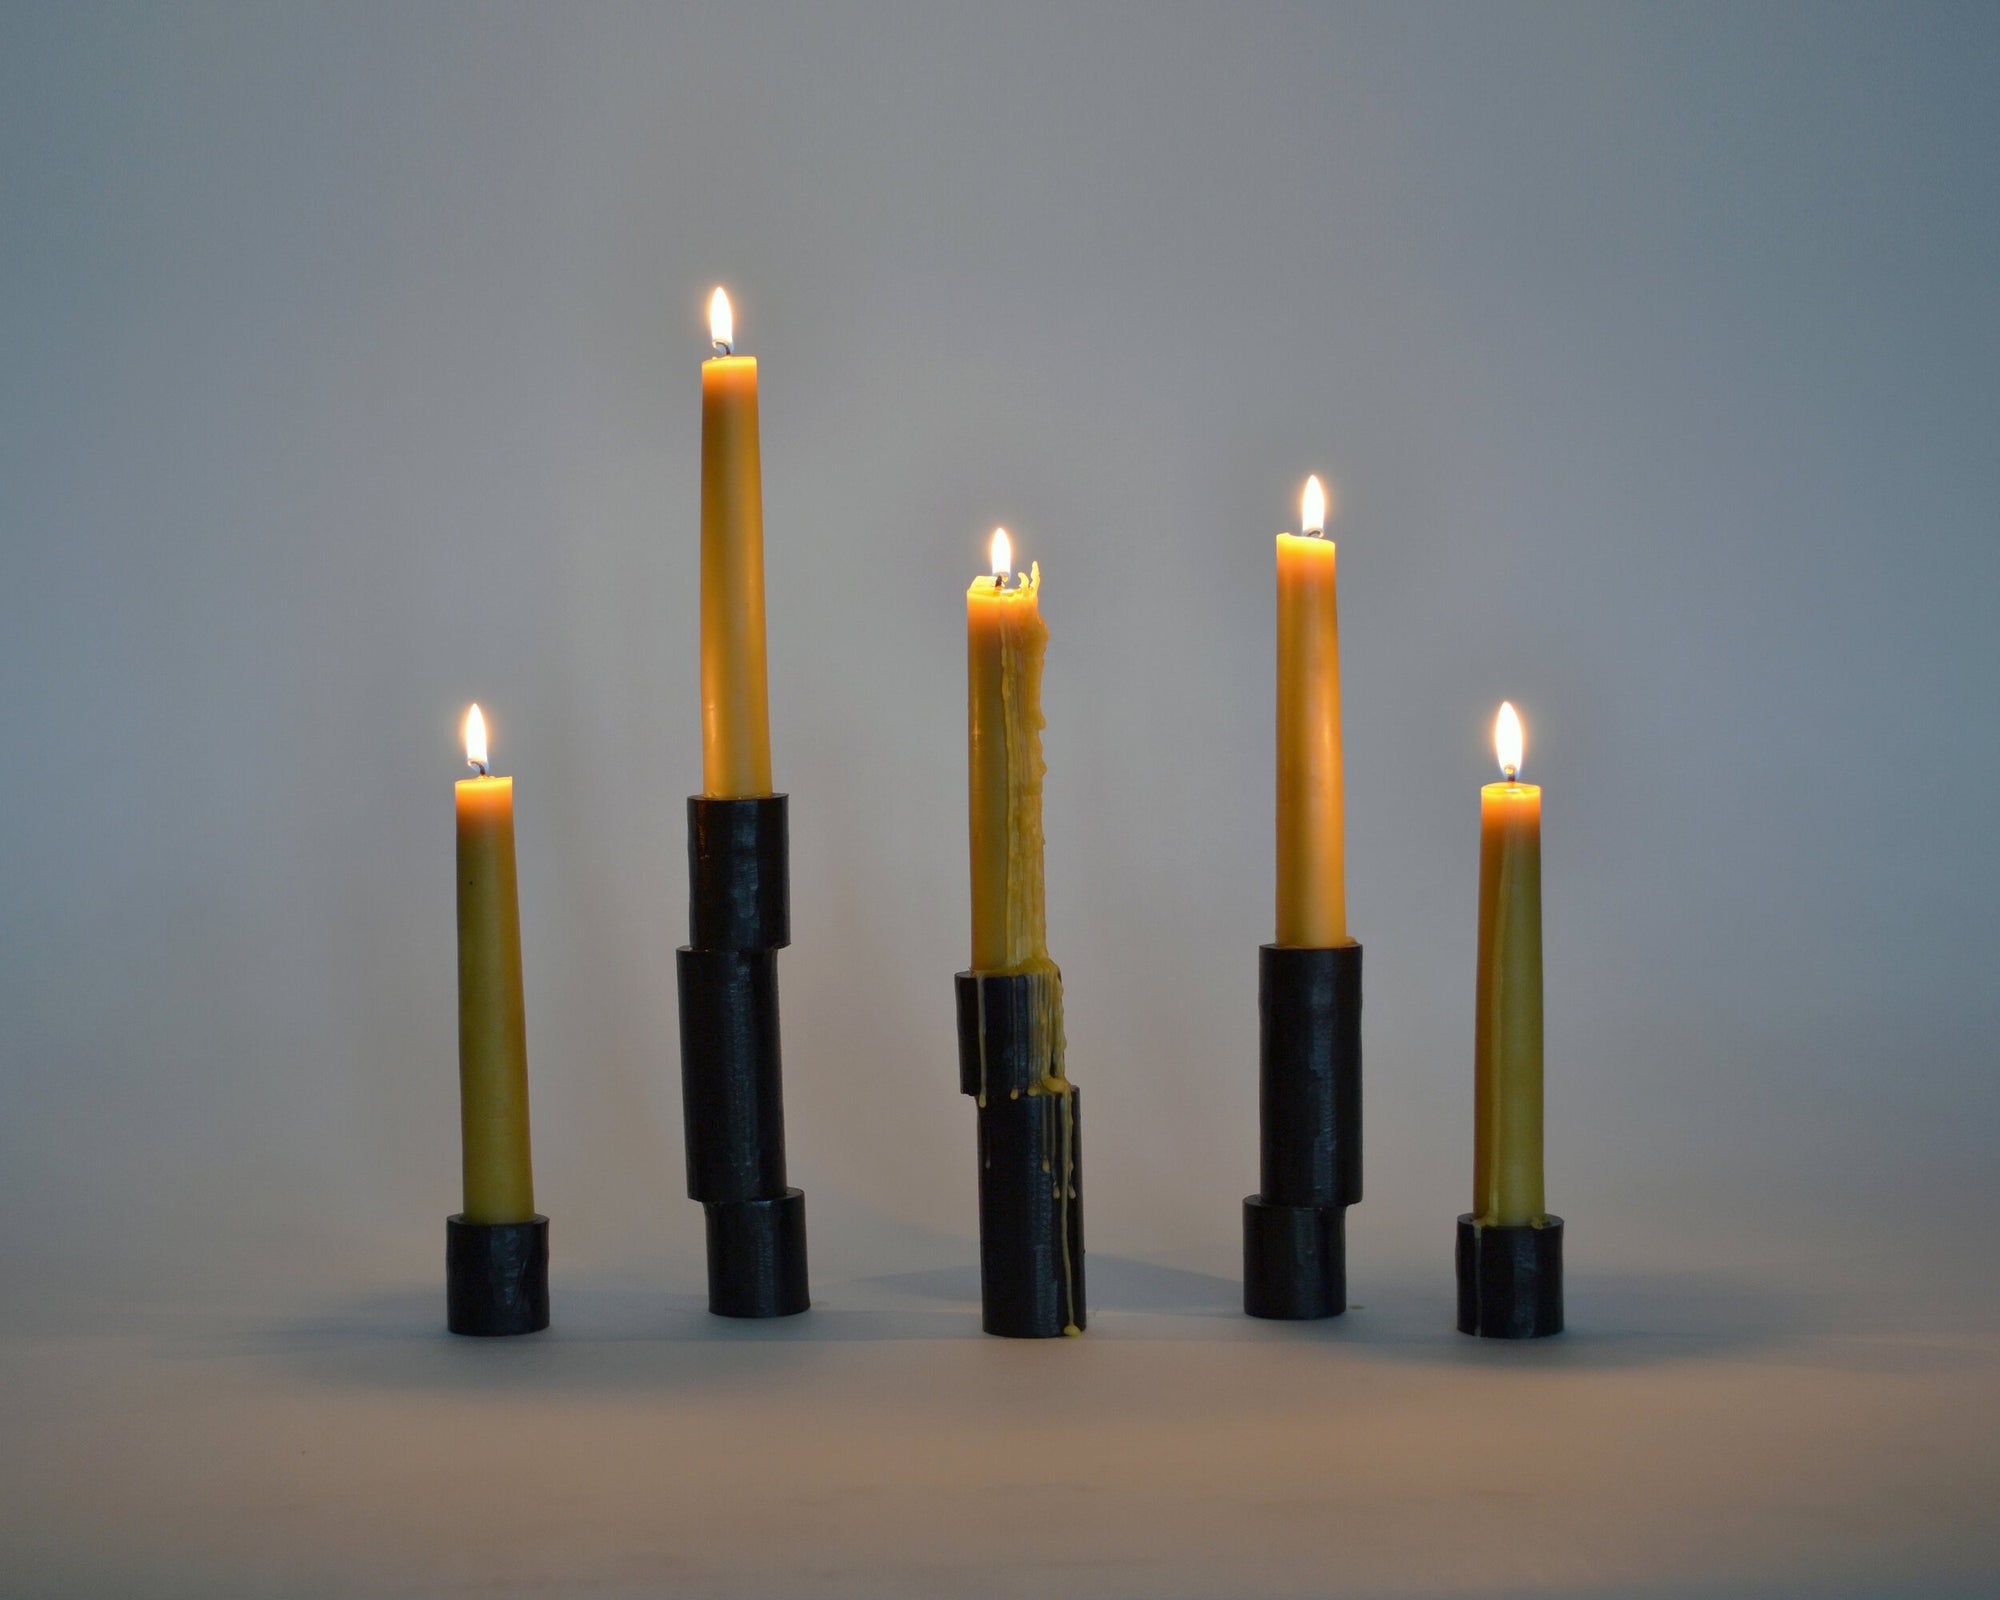 COLLECTION OF CANDLESTICKS